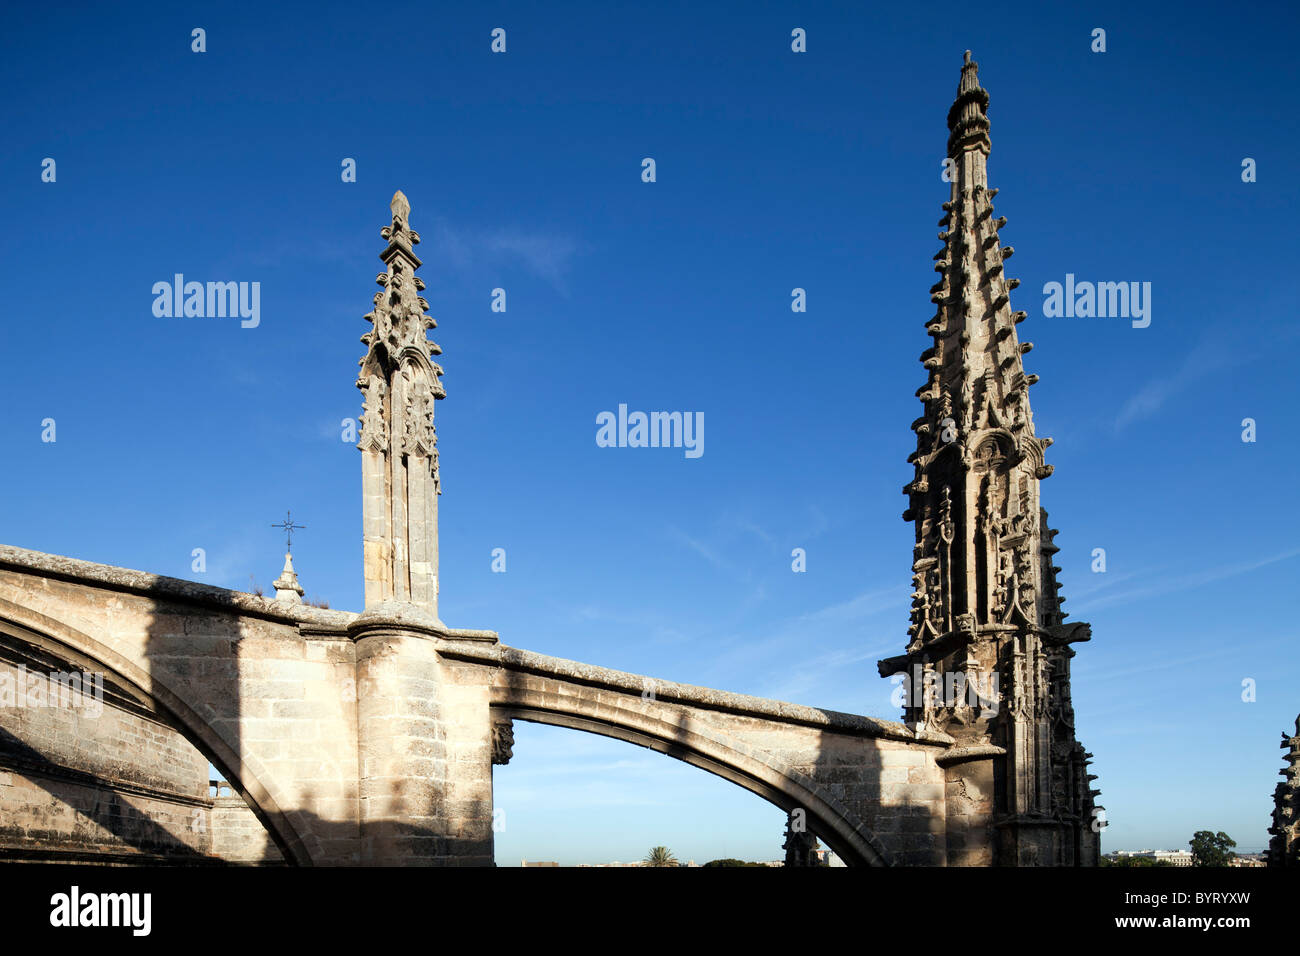 Gothic flying buttress and pinnacle on the roof of Santa Maria de la Sede Cathedral, Seville, Spain Stock Photo